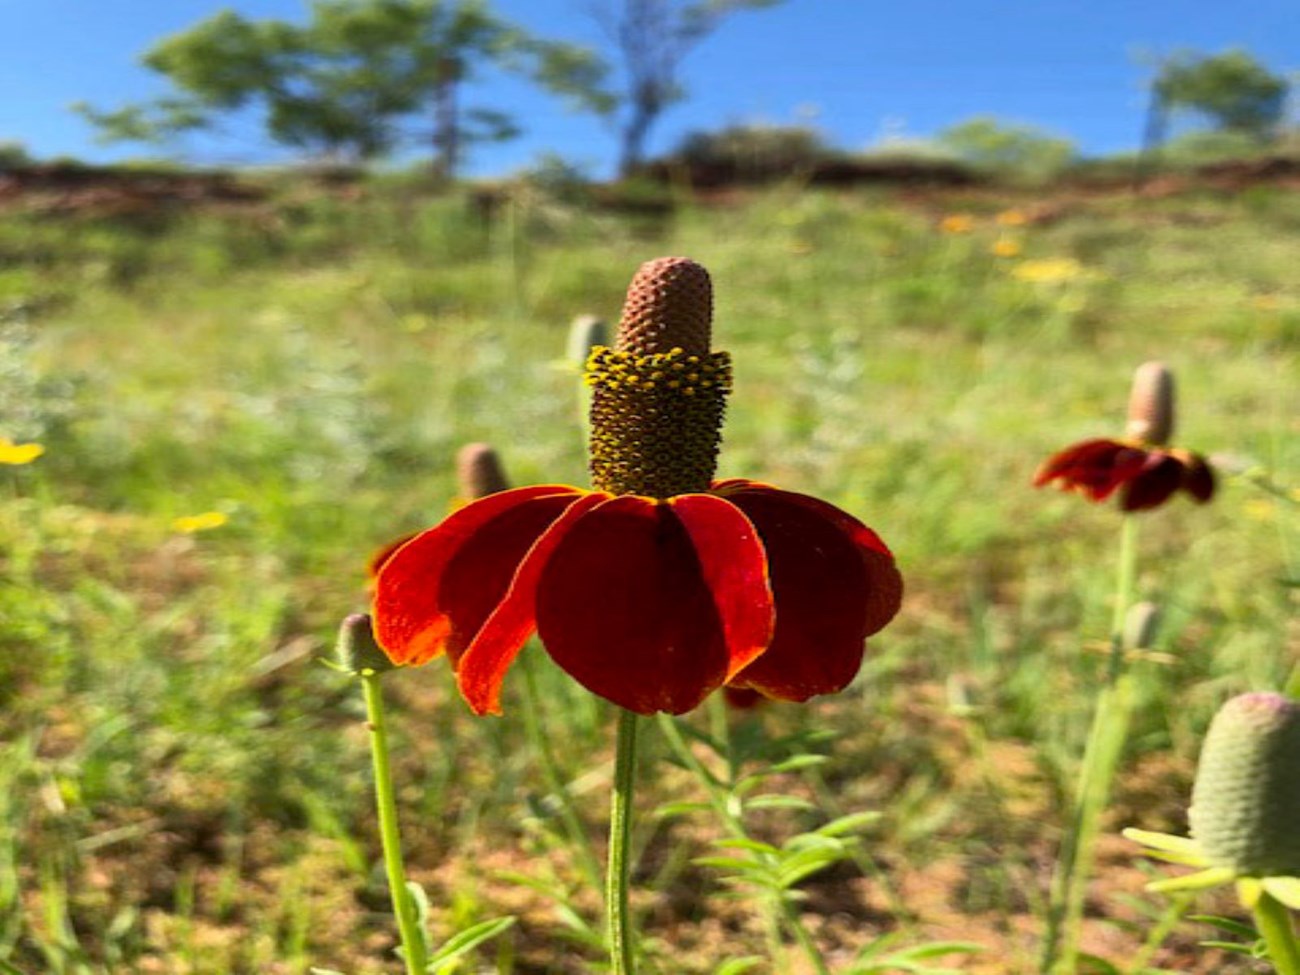 A Mexican Hat growing in a field.  The flower is dark red with a brown center.